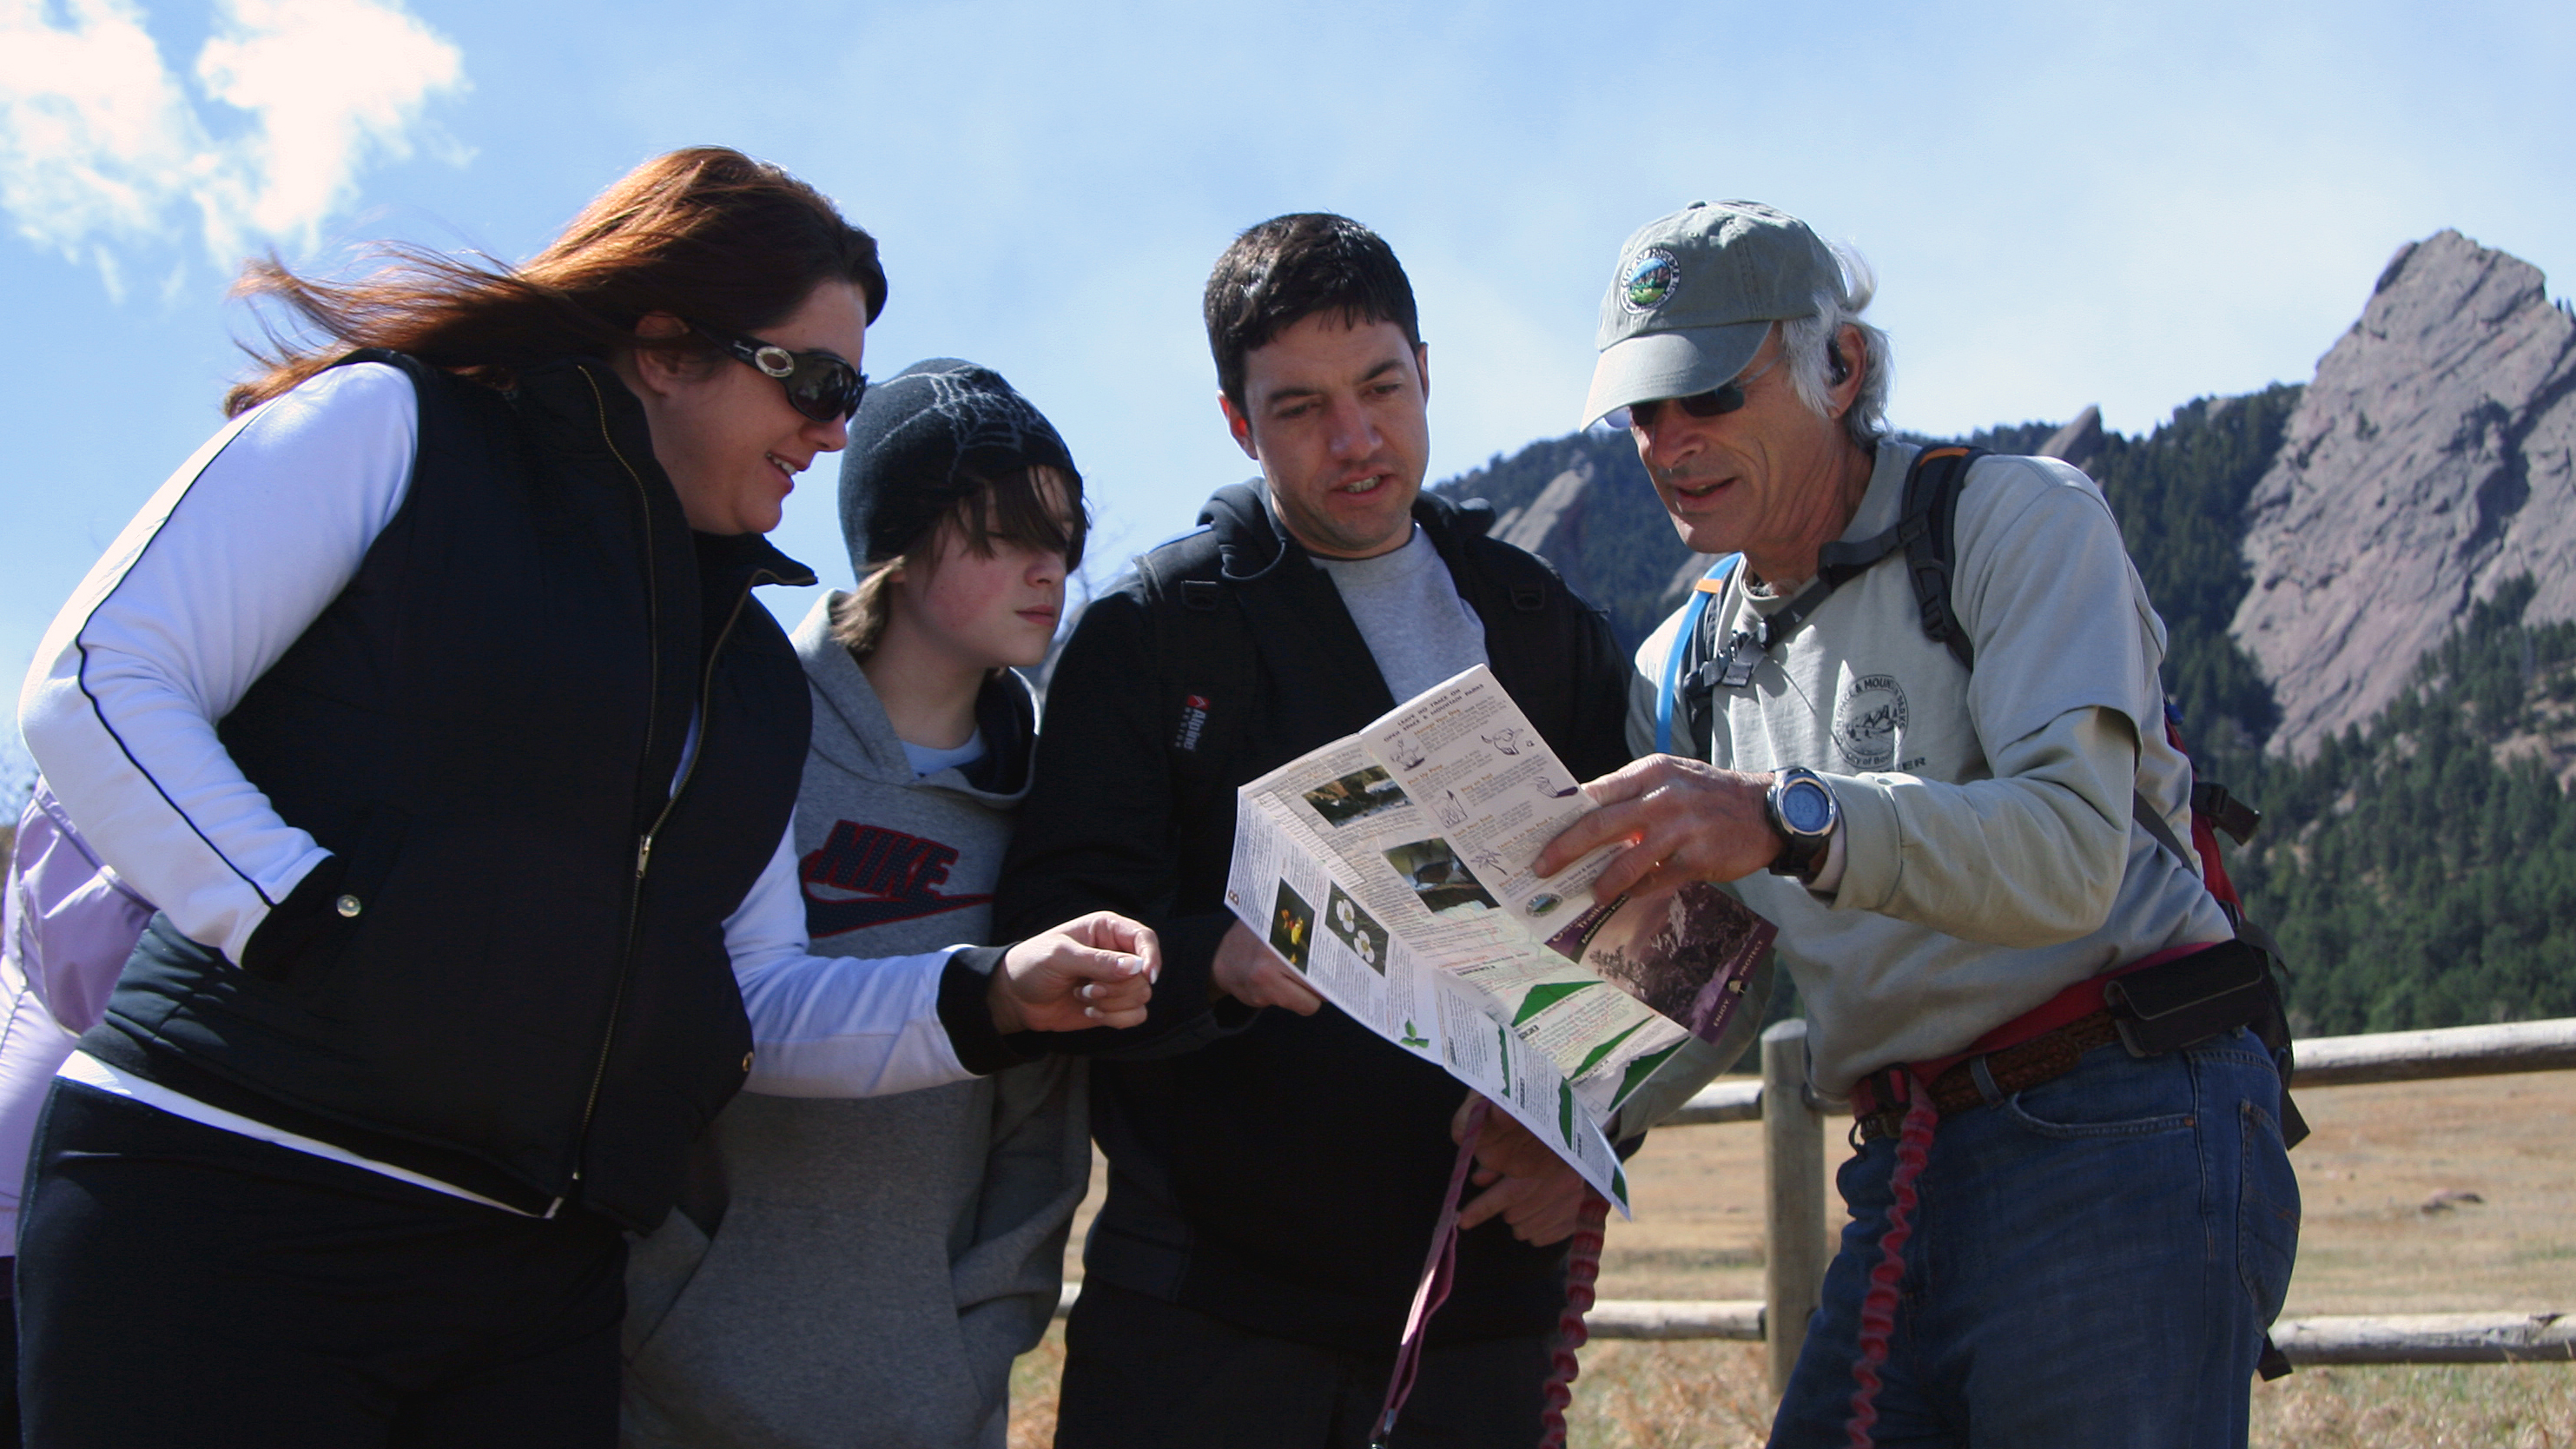 A OSMP trail ambassador helps visitors in the Chautauqua Meadow